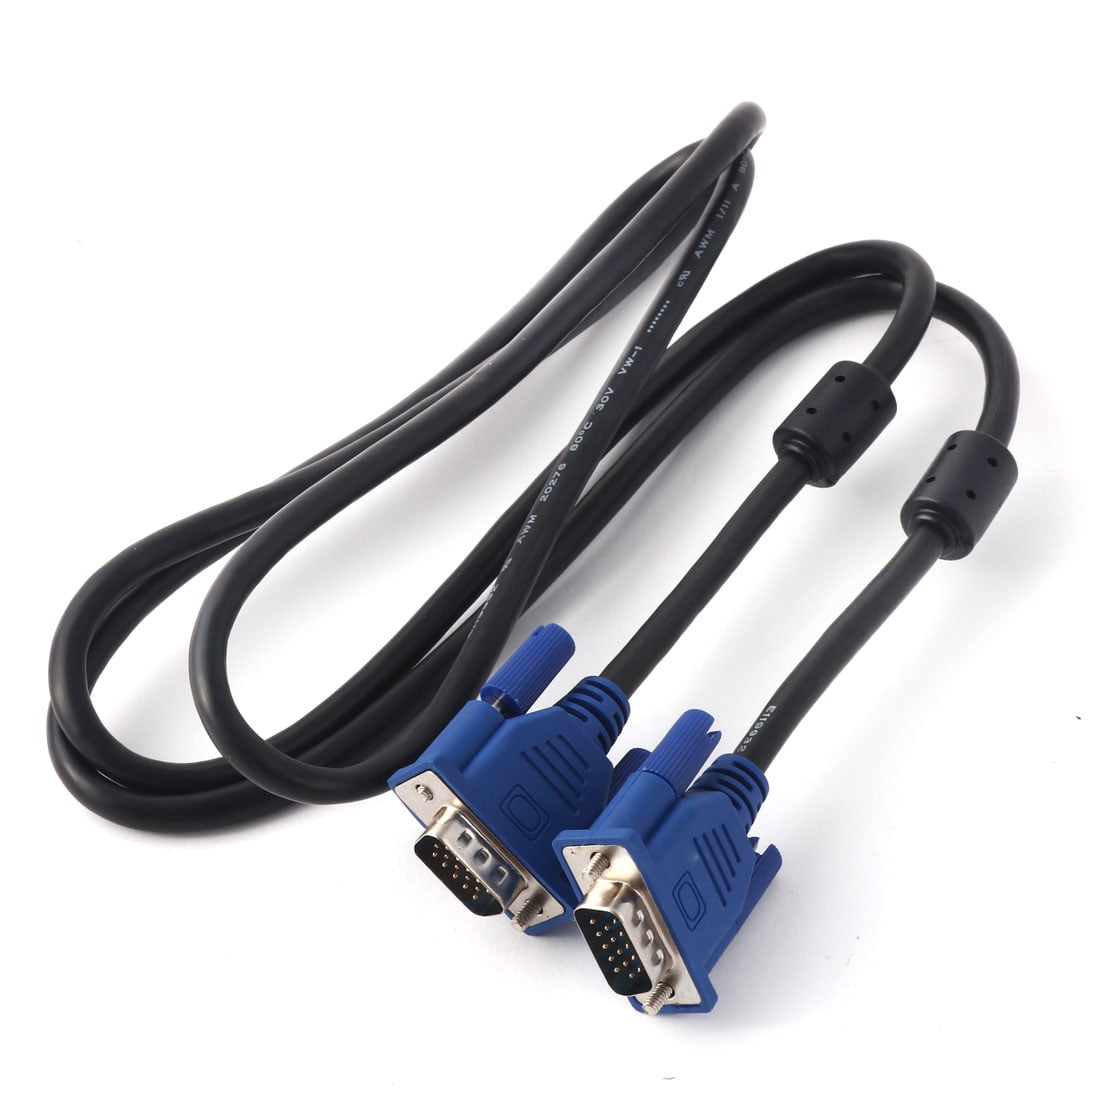 5ft VGA SVGA Male Male 15pin Cable Connects Computers to Projector Monitors TV 